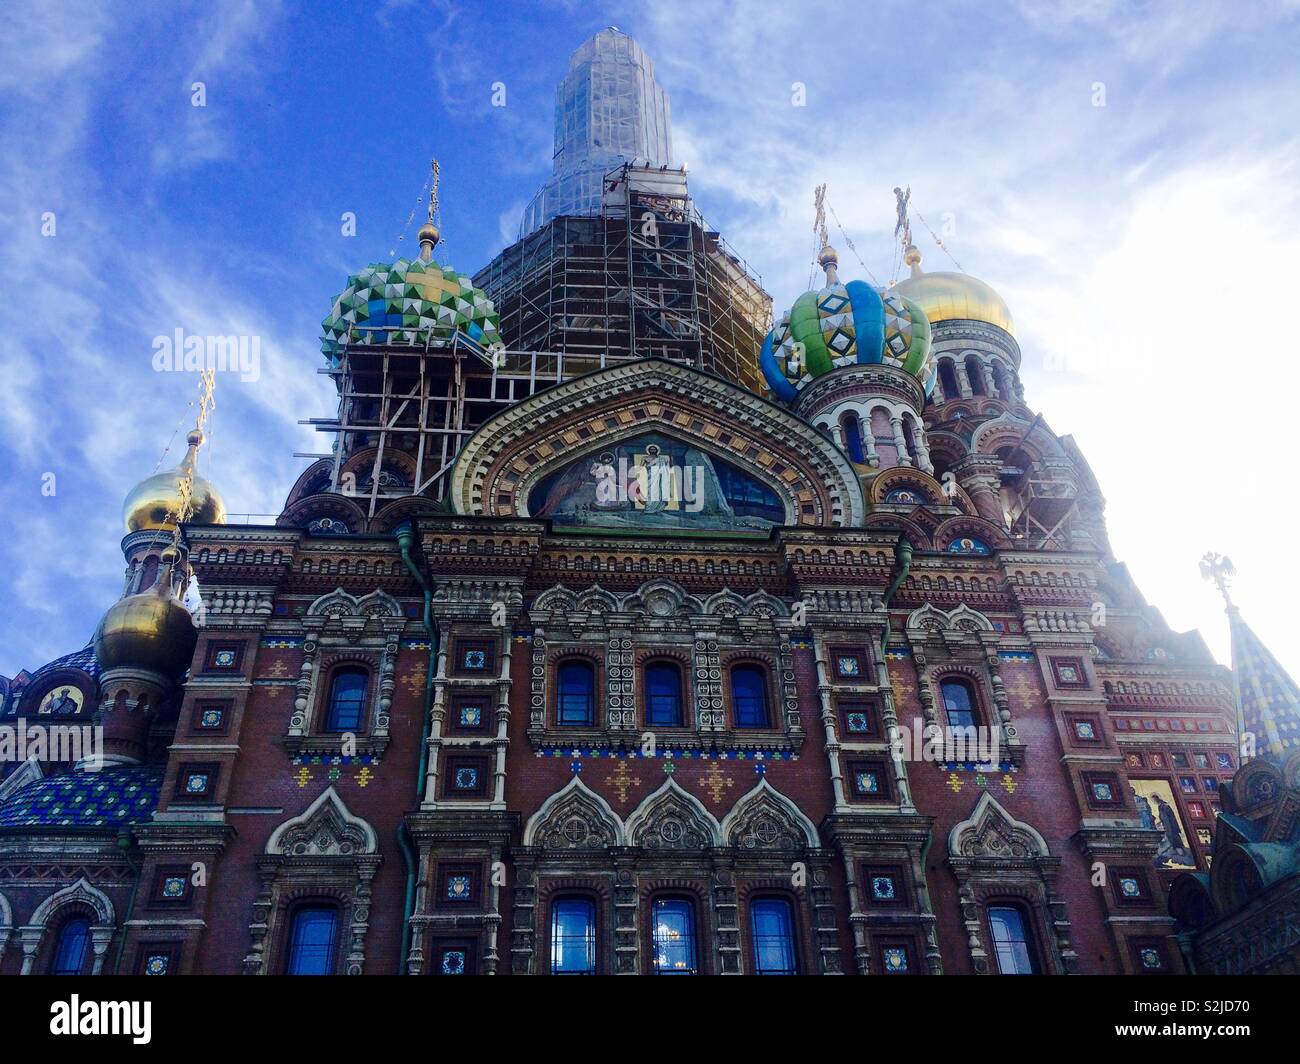 Church of the savior on spilled blood in St. Petersburg Russia exterior facade Stock Photo